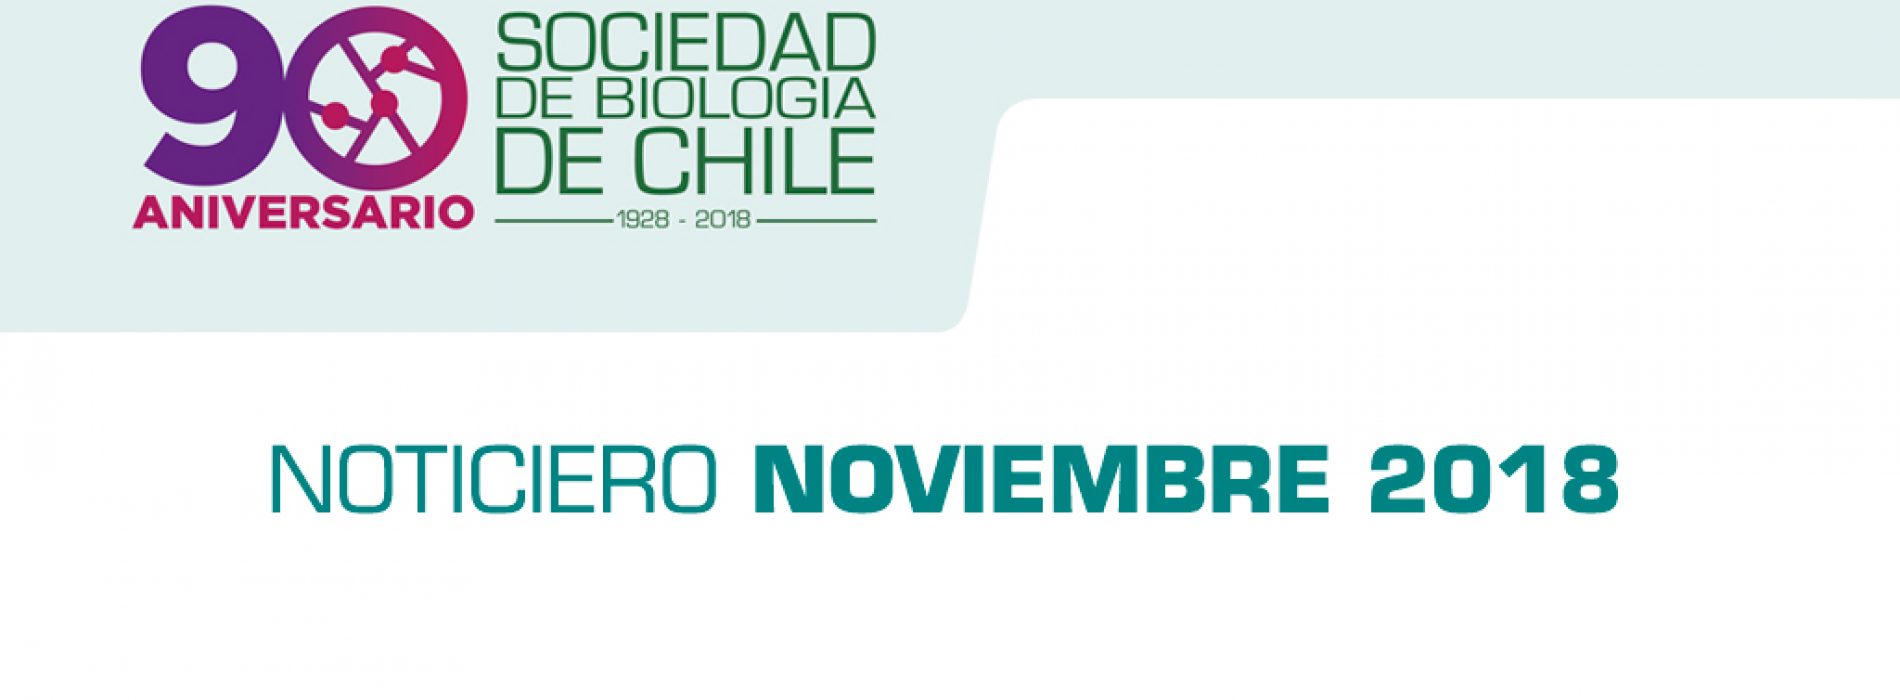 News month of November 2018, biology society of Chile